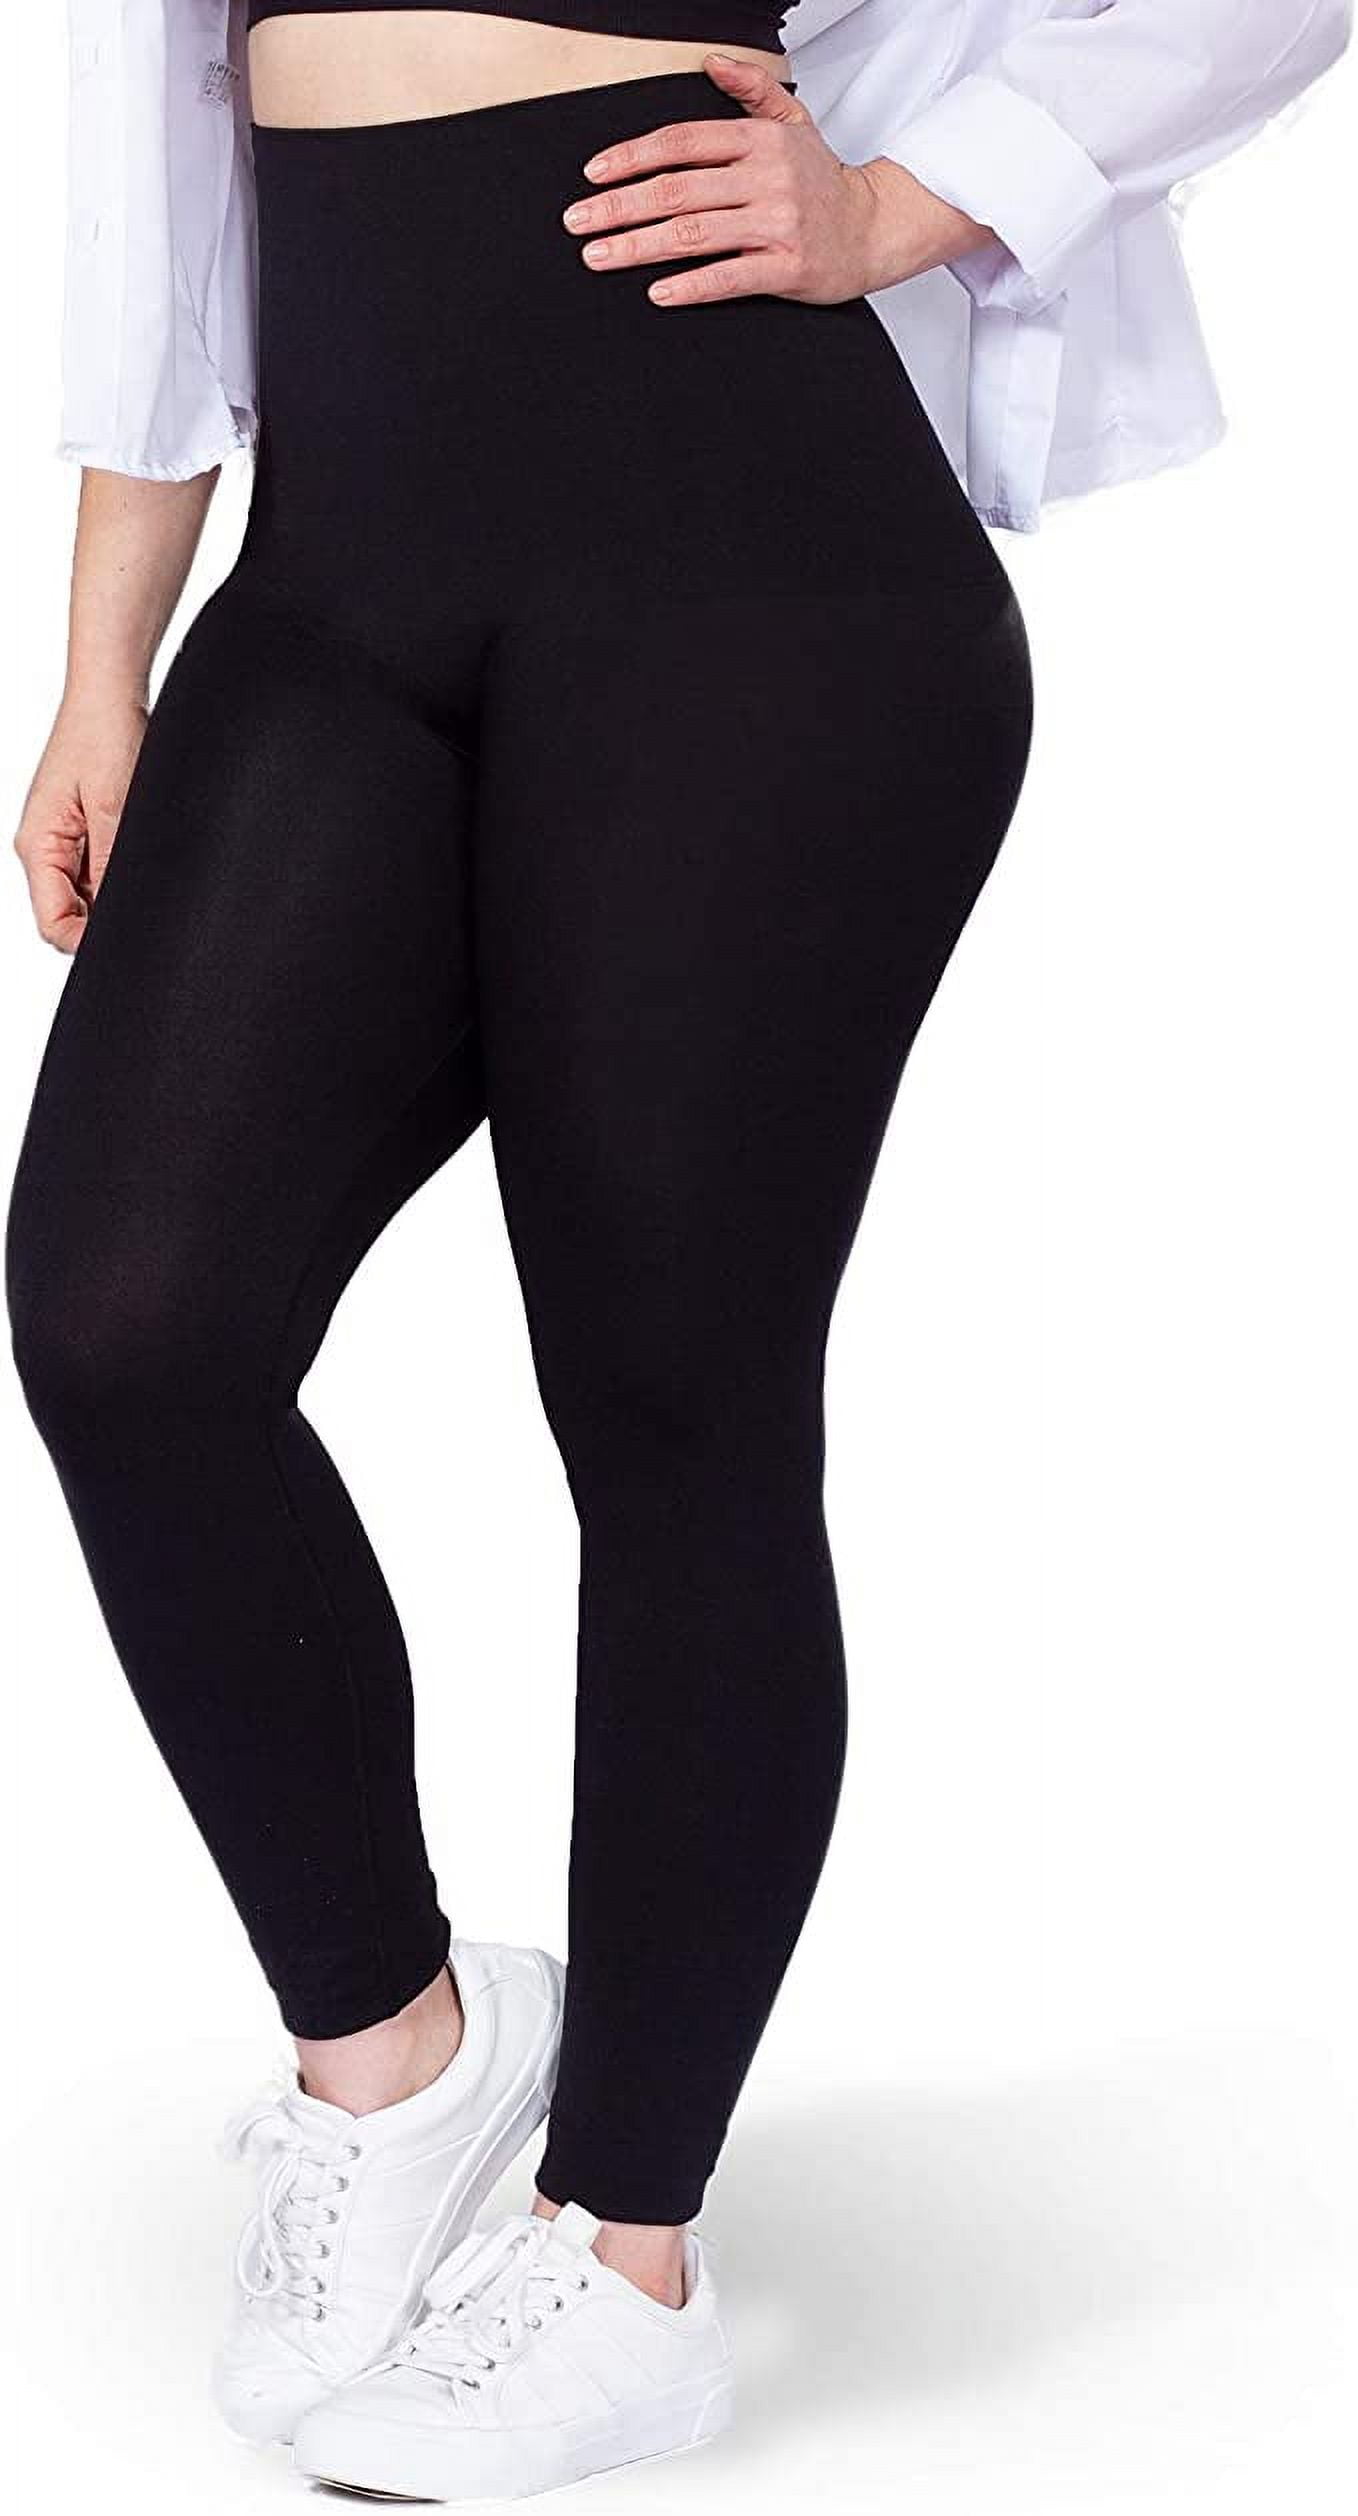 FITVALEN Seamless High Waisted Compression Leggings Anti-Cellulite Push Up  GYM Shapewear Pants for Women Fitness